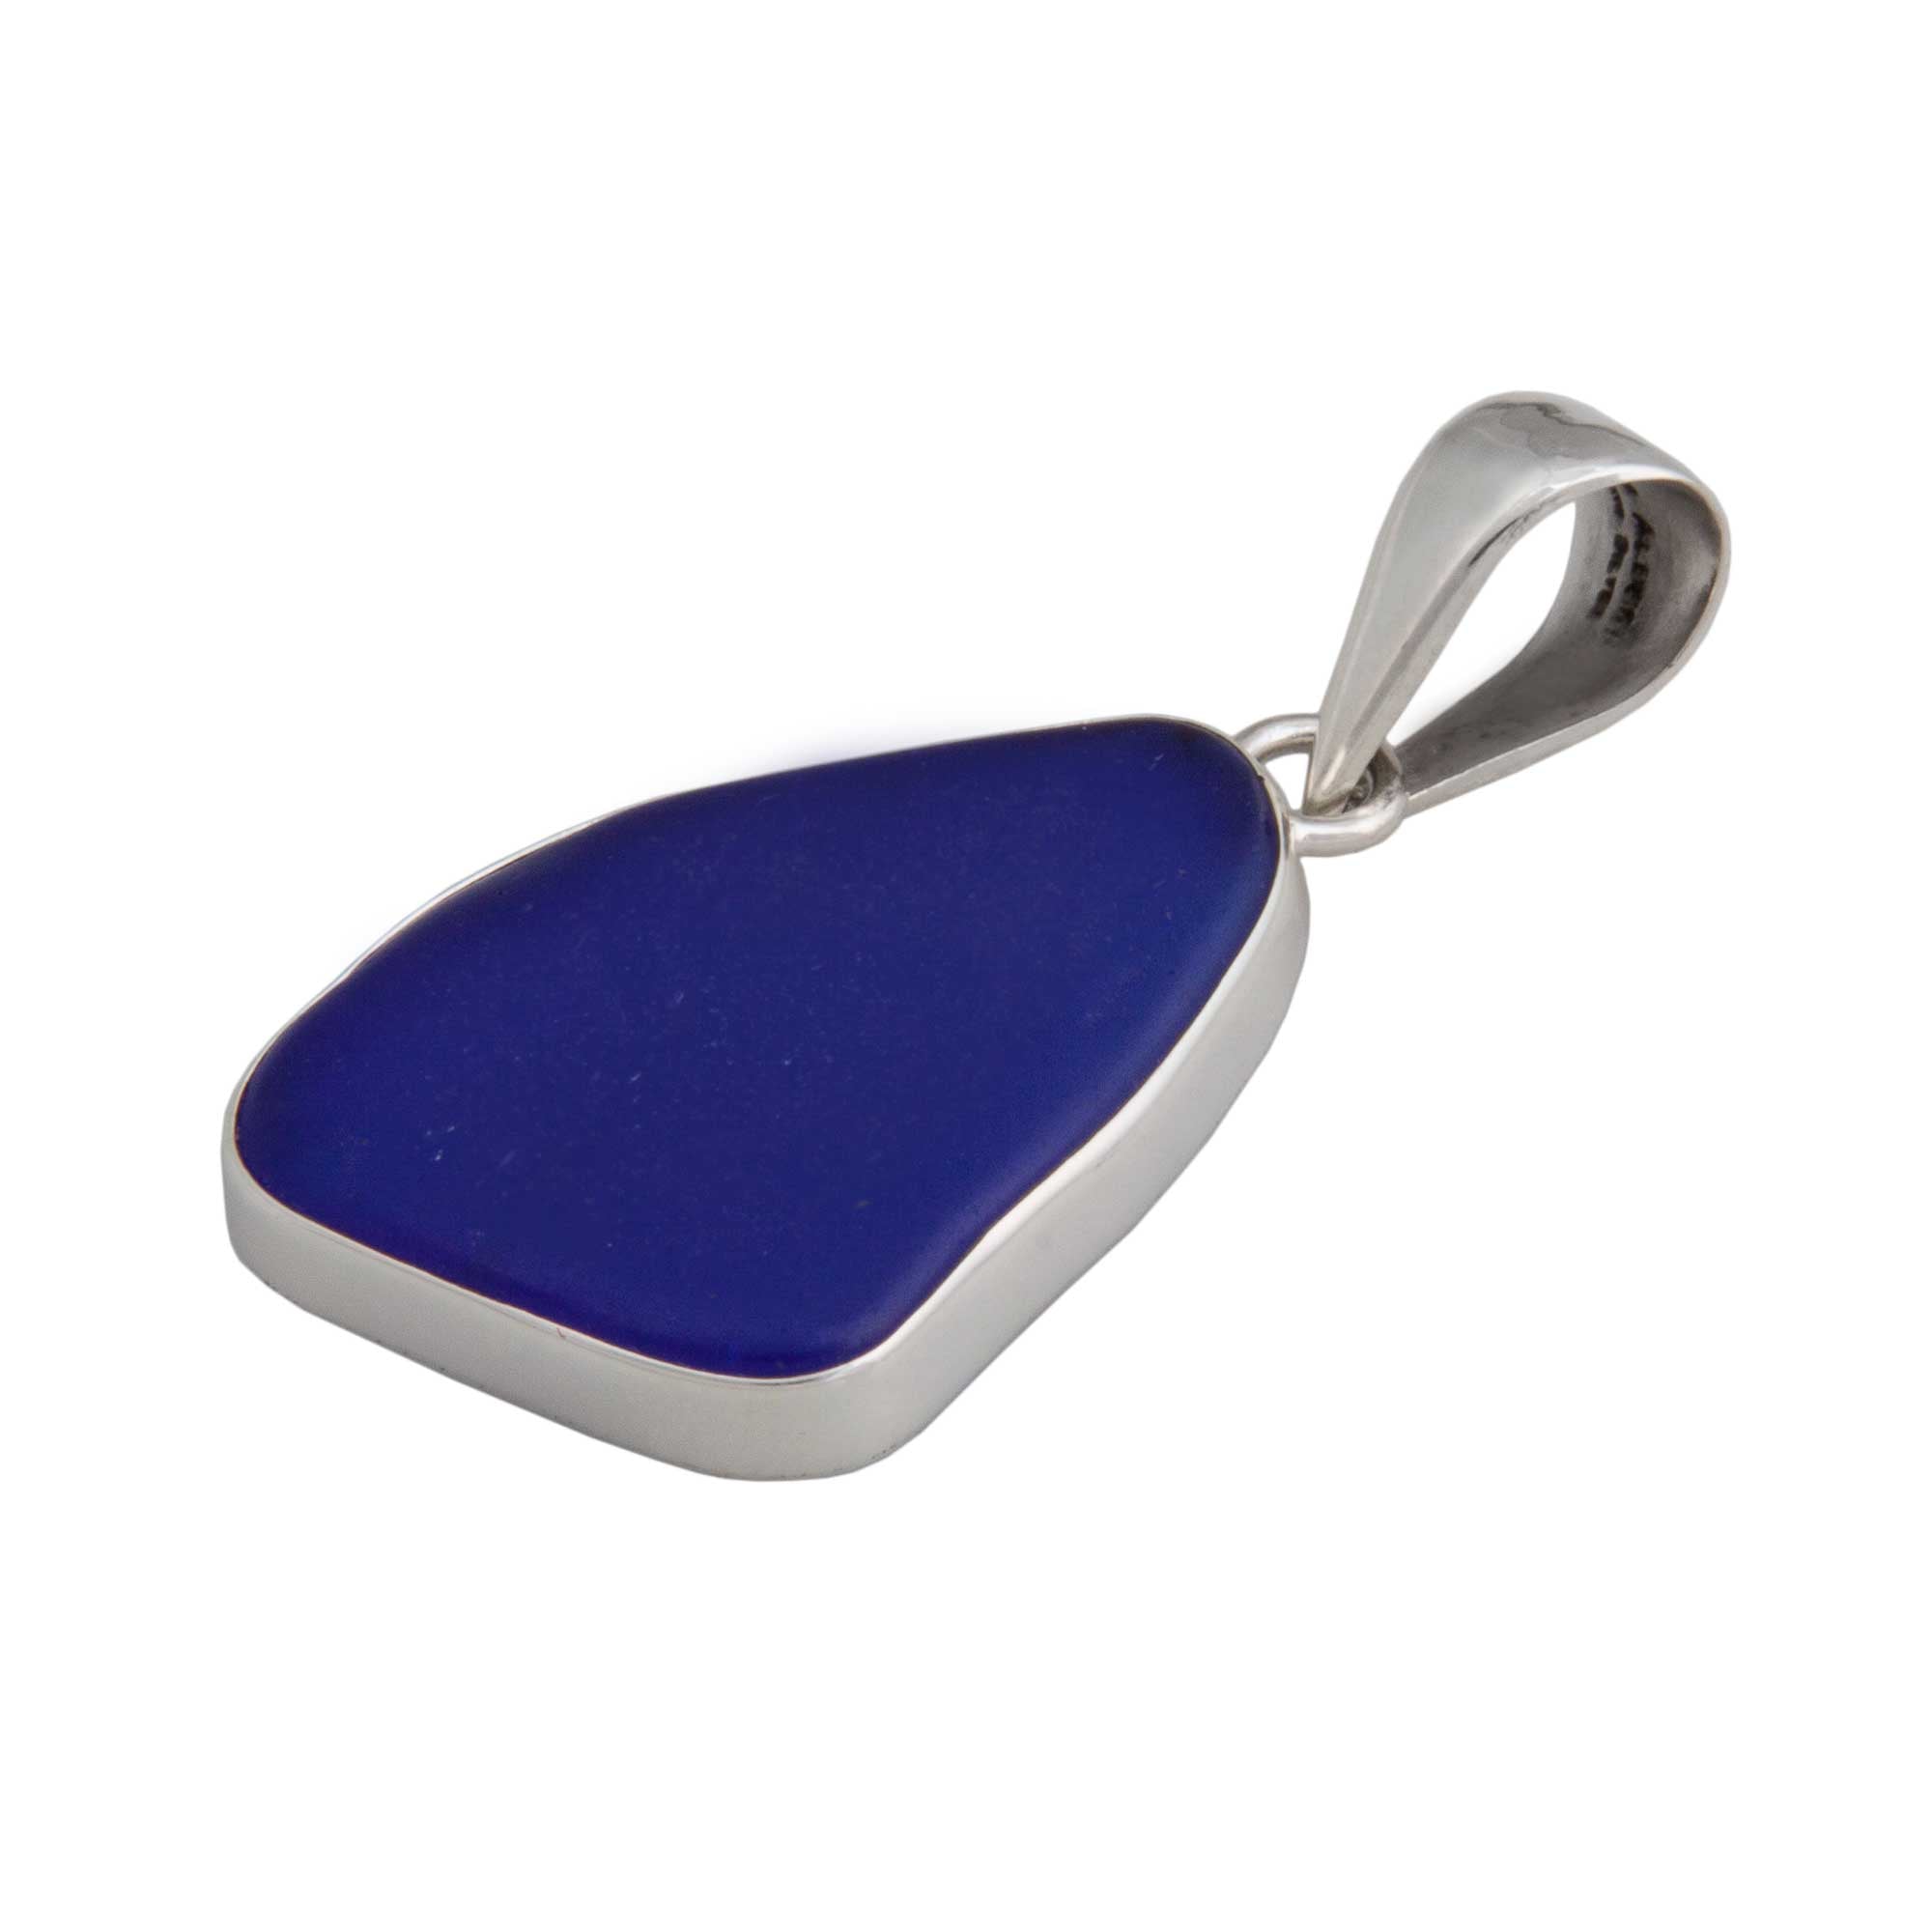 Charles Albert Jewelry - Sterling Silver Cobalt Blue Recycled Glass Pendant - Side View